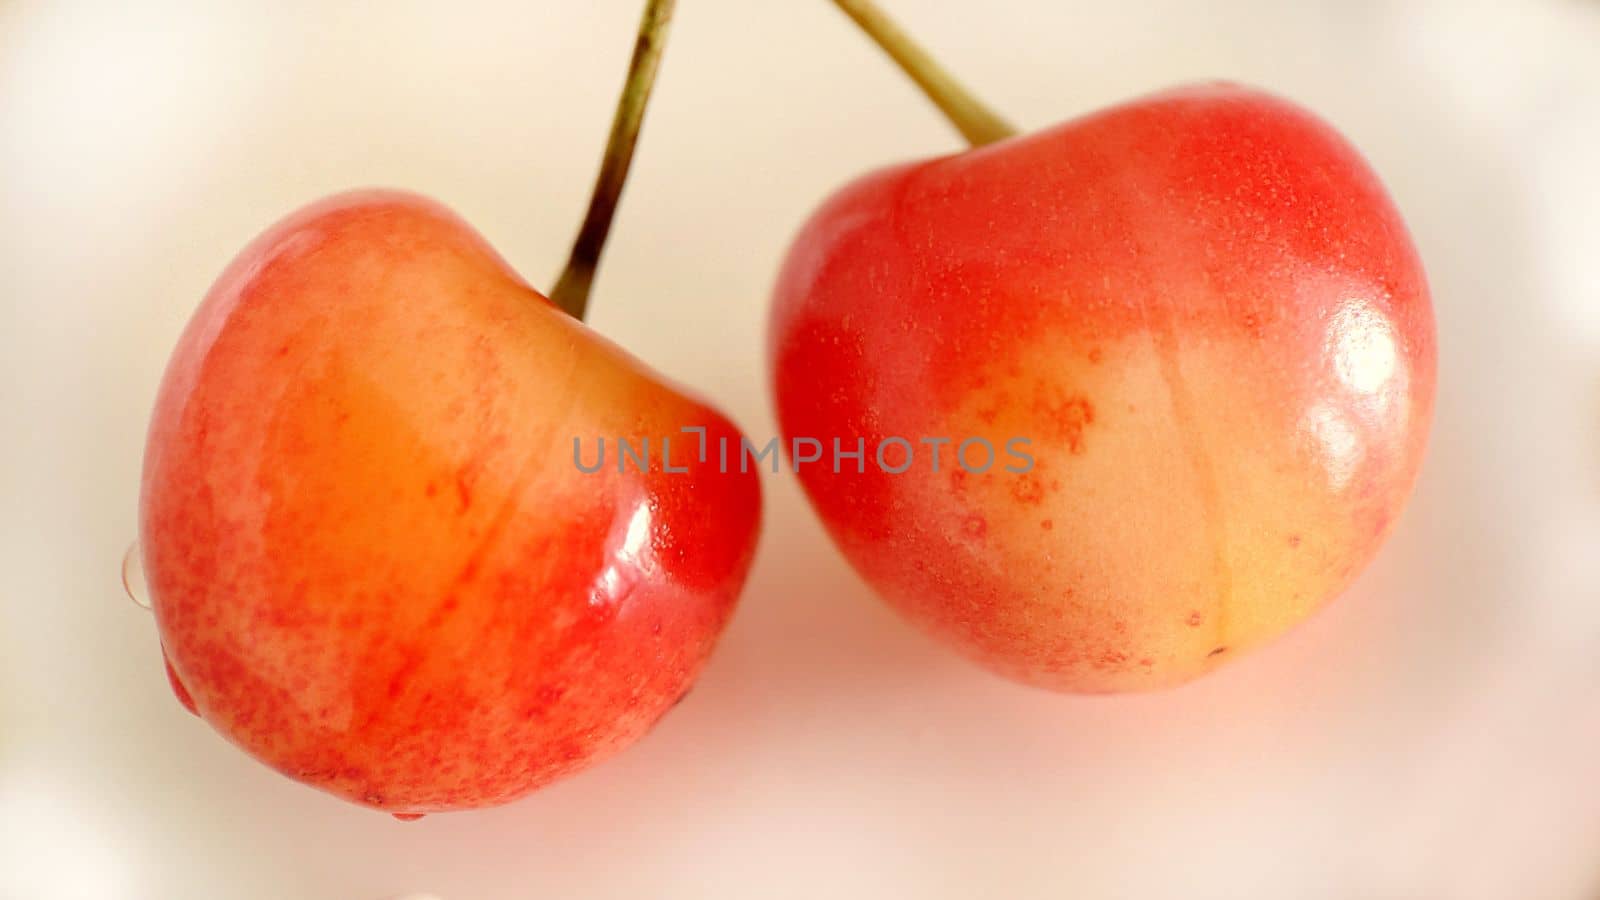 Two yellow-red cherries on a light background close-up by Mastak80